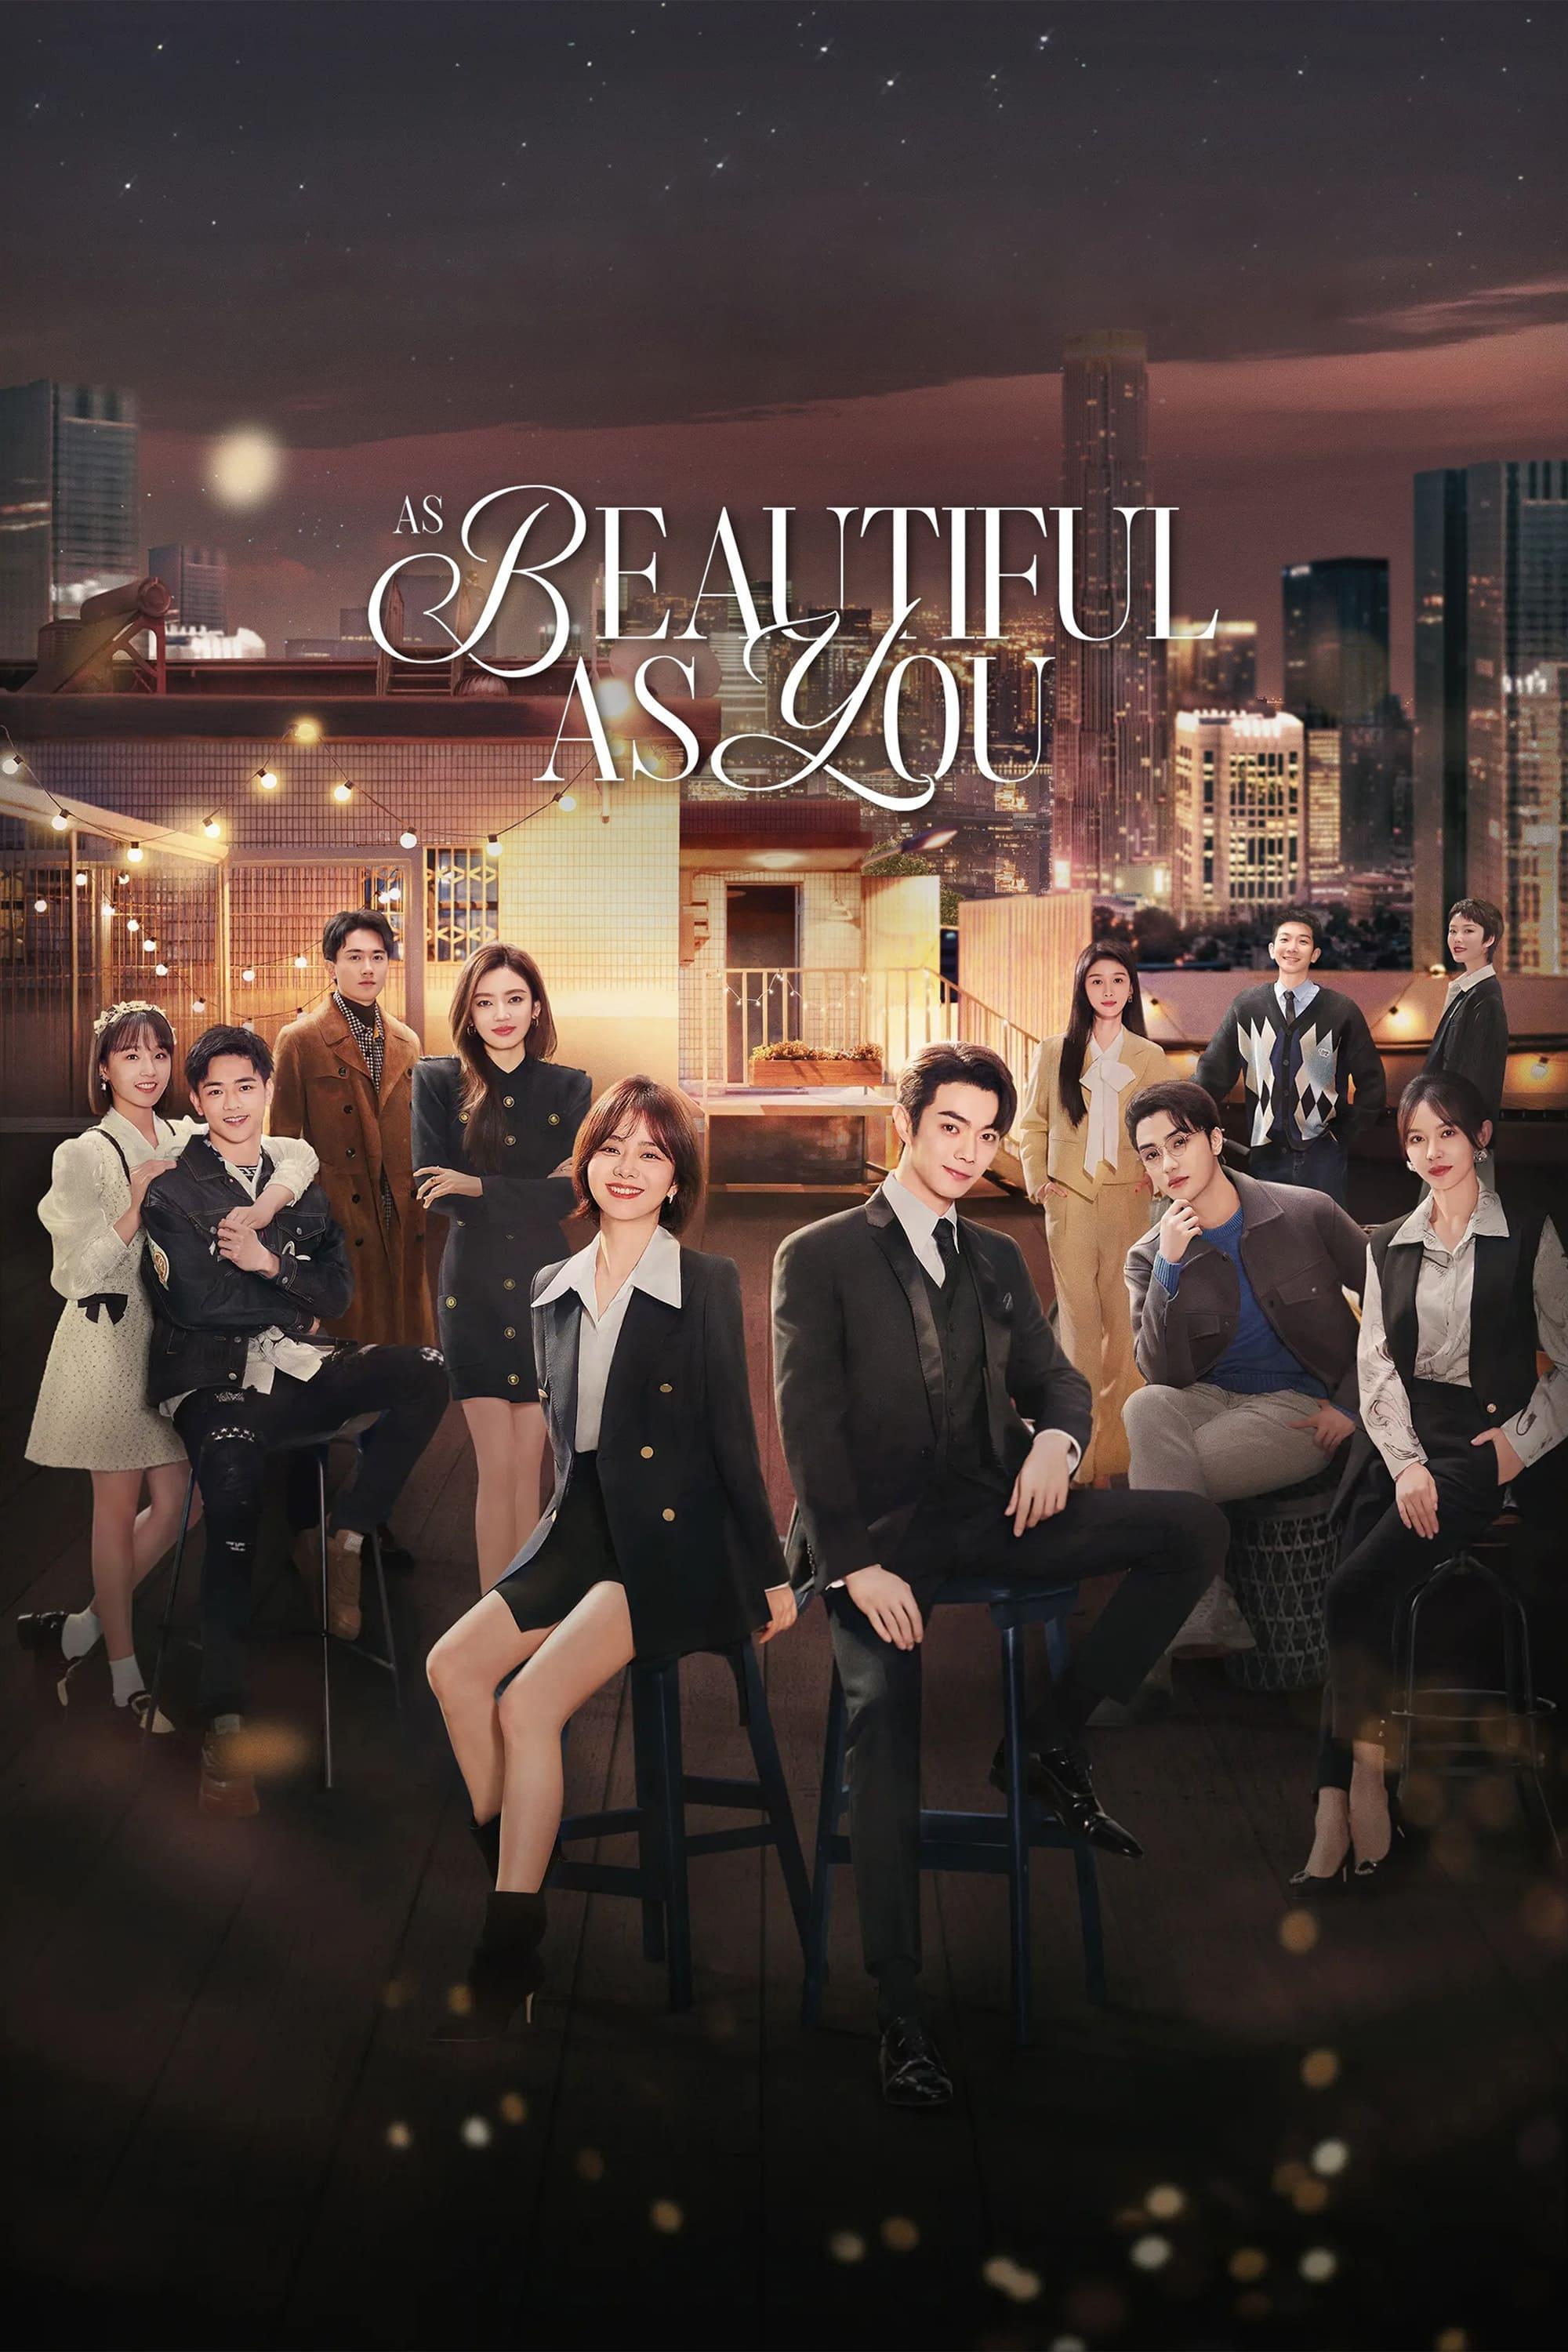 As Beautiful As You poster